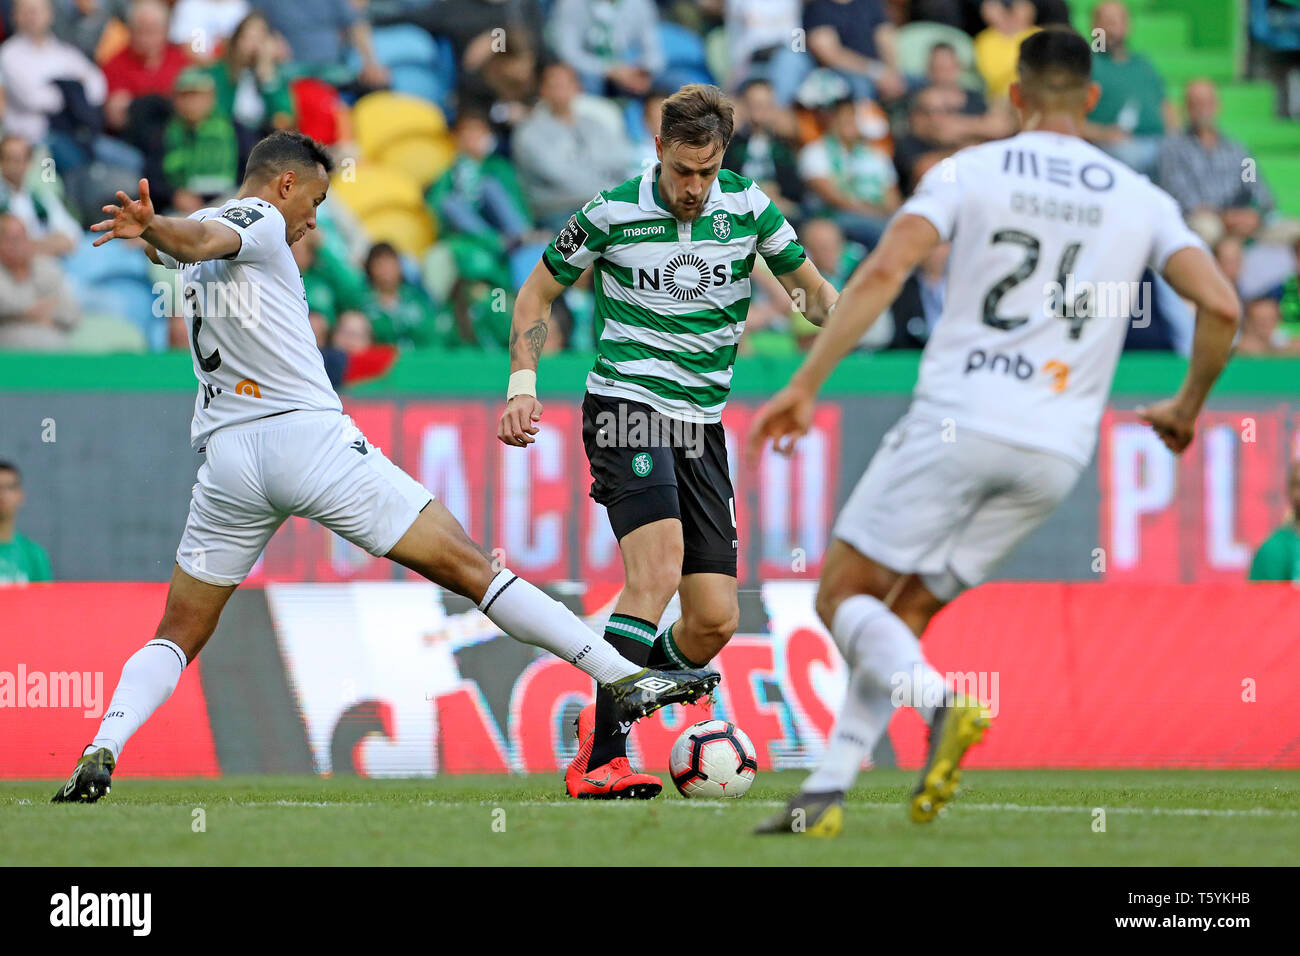 Sebastián Coates of Sporting CP seen in action during the League NOS 2018/19 football match between Sporting CP vs Vitória SC in Lisbon. (Final score: Sporting CP 2 - 0 Vitória SC) Stock Photo